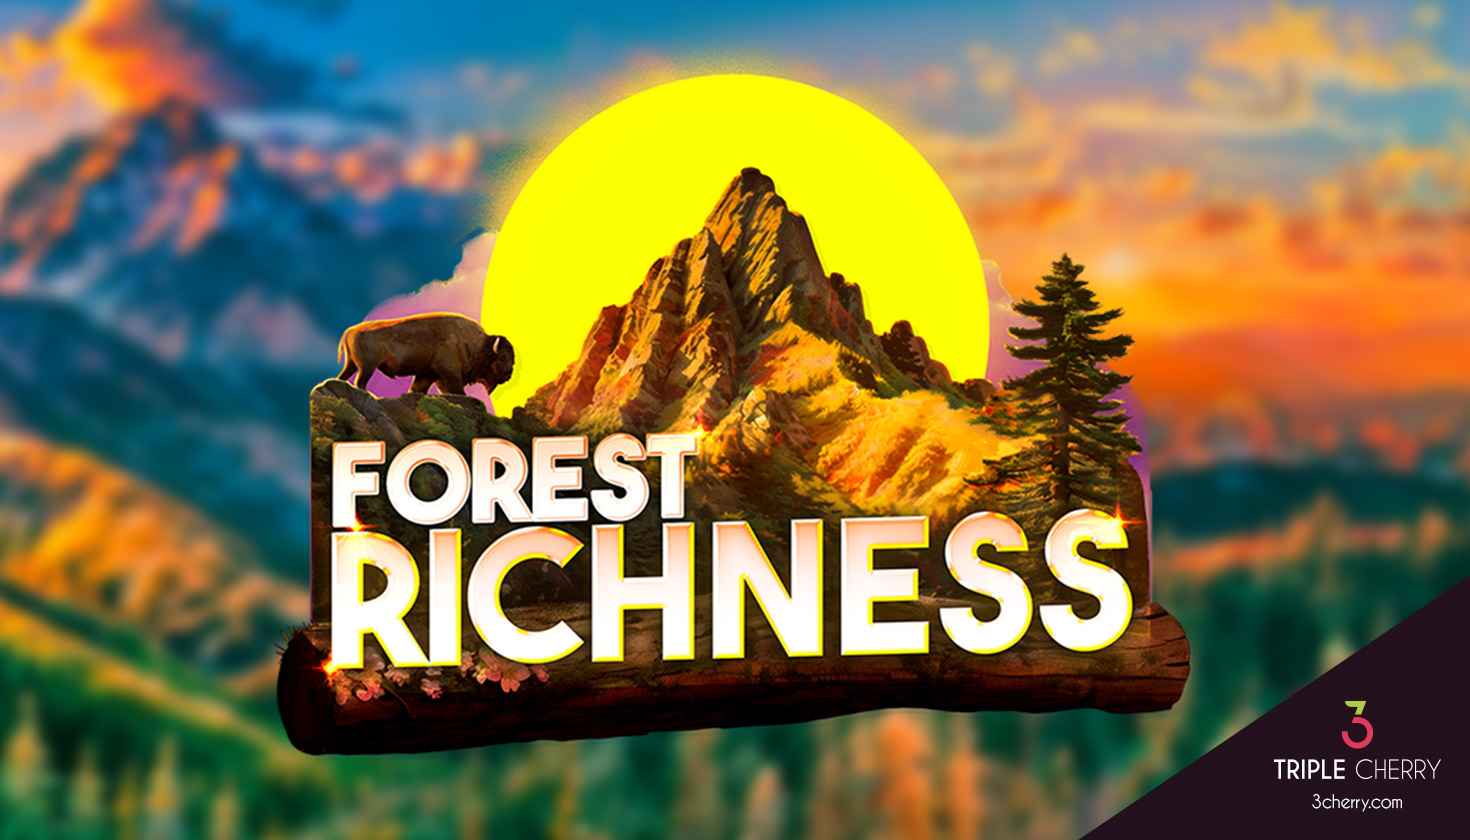 Forest Richness by Triple Cherry